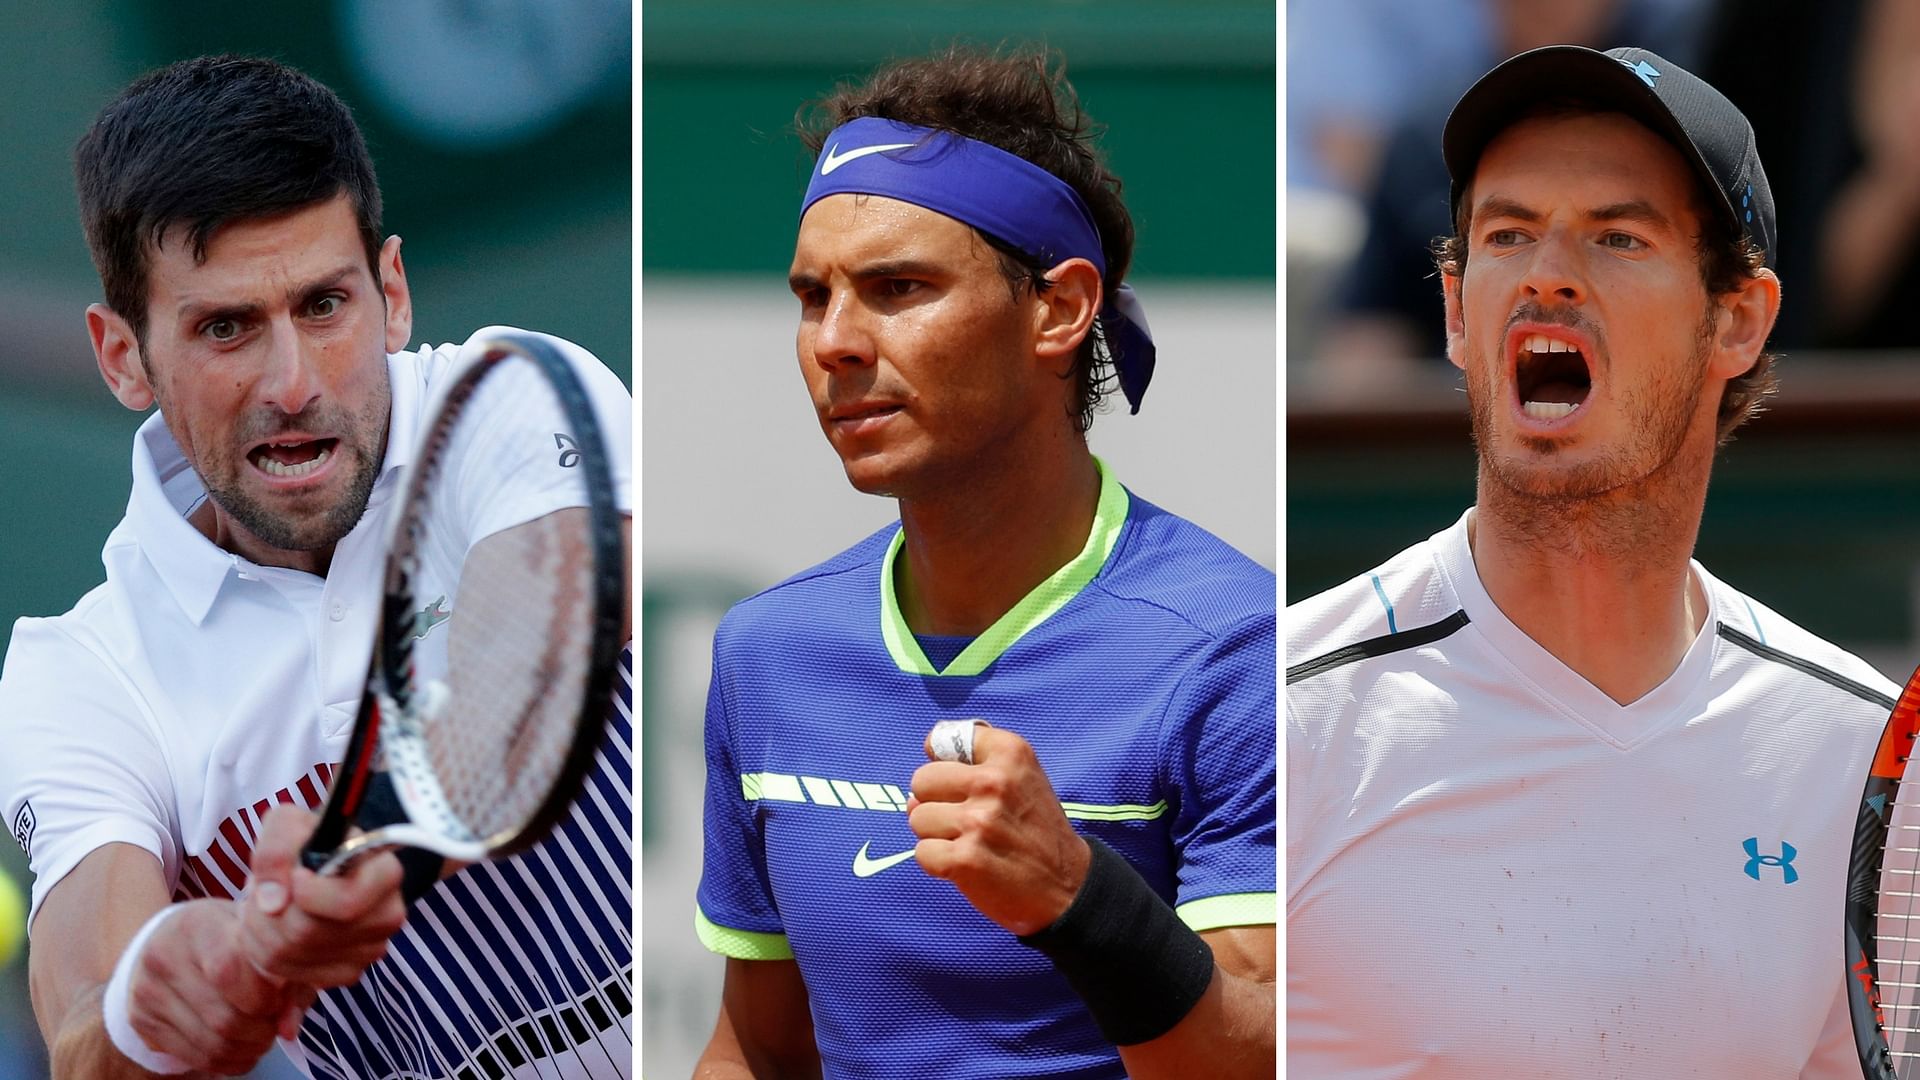 Novak Djokovic, Rafael Nadal and Andy Murray play in the French Open’s quarter-final on Wednesday. (Photo: AP)